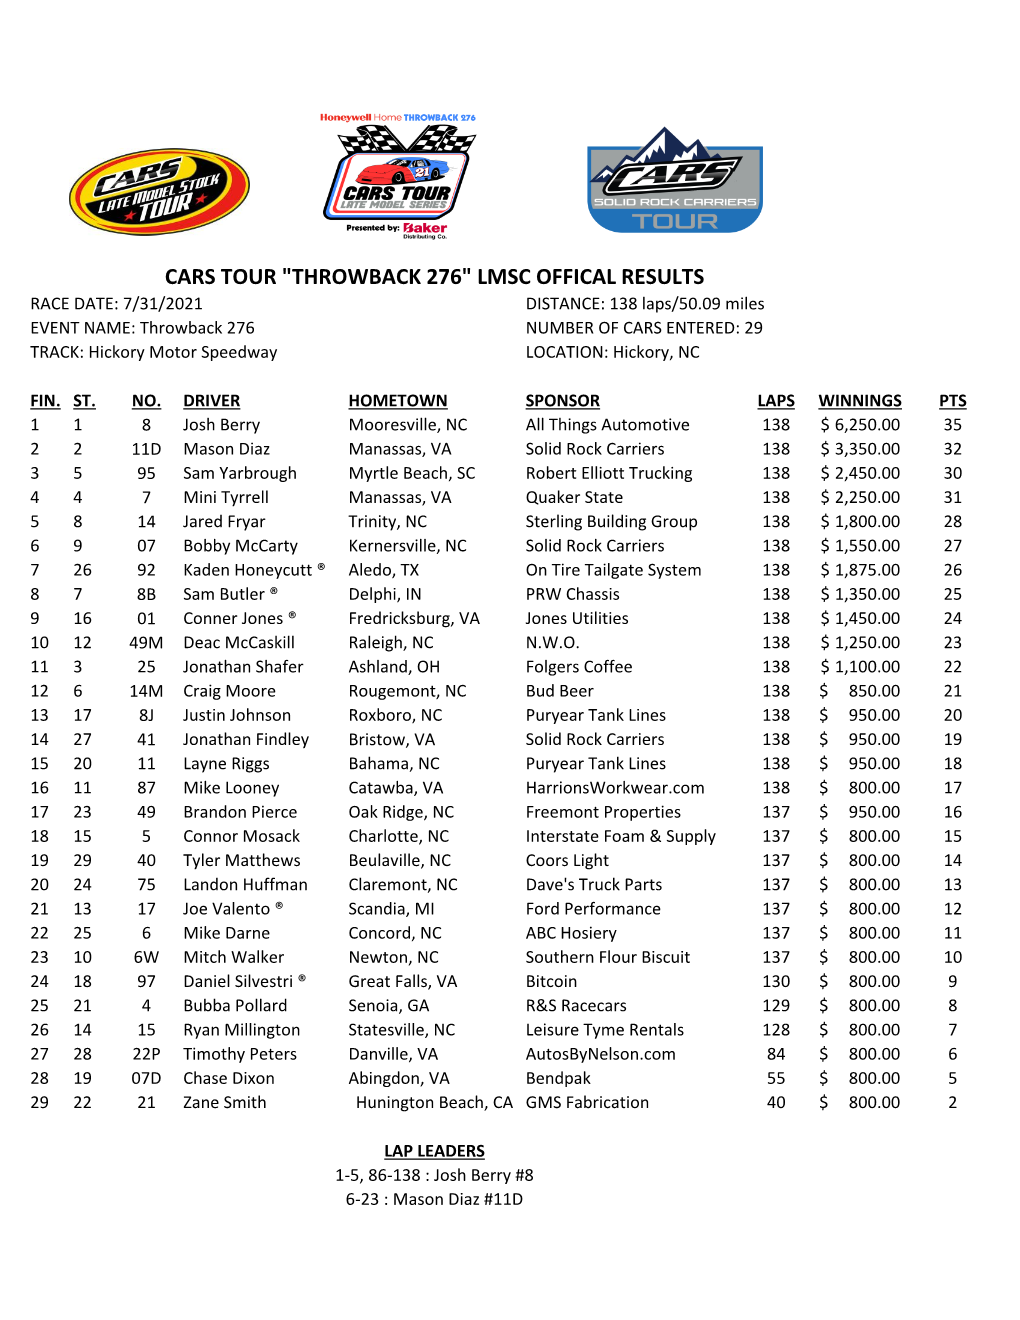 Cars Tour "Throwback 276" Lmsc Offical Results